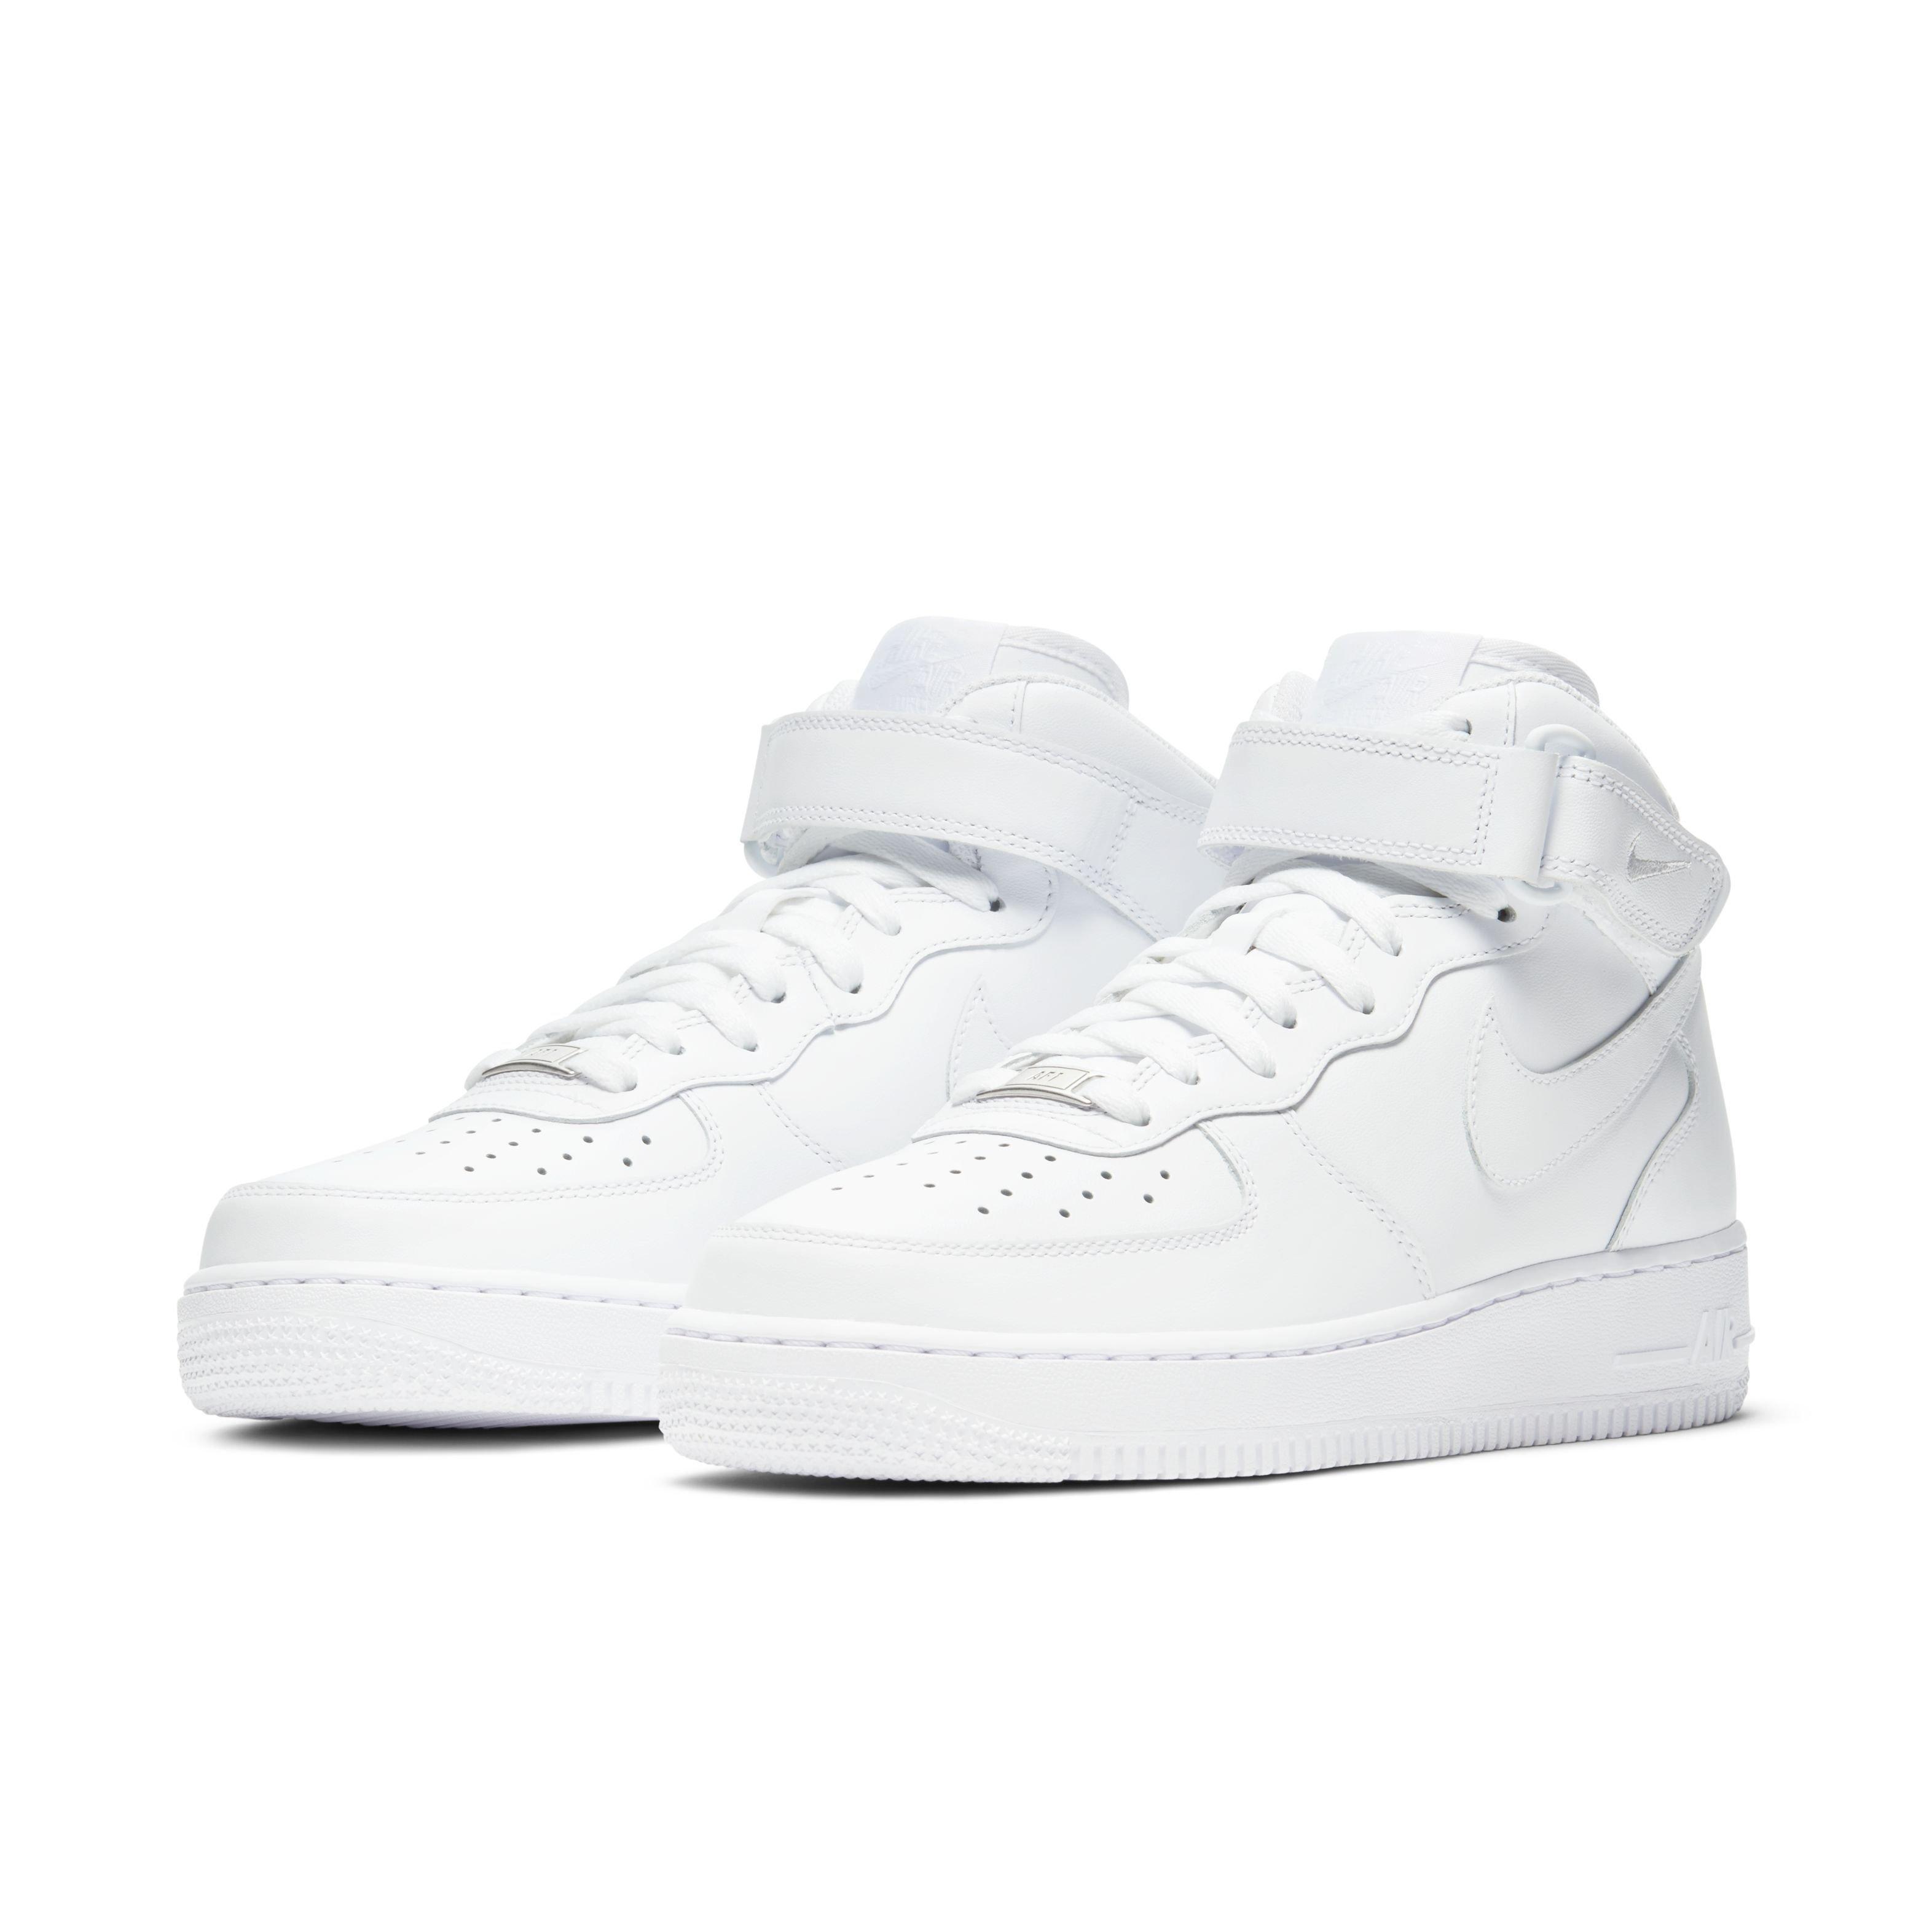 Nike Wmns Air Force 1 07 Mid White - Size 6 Women